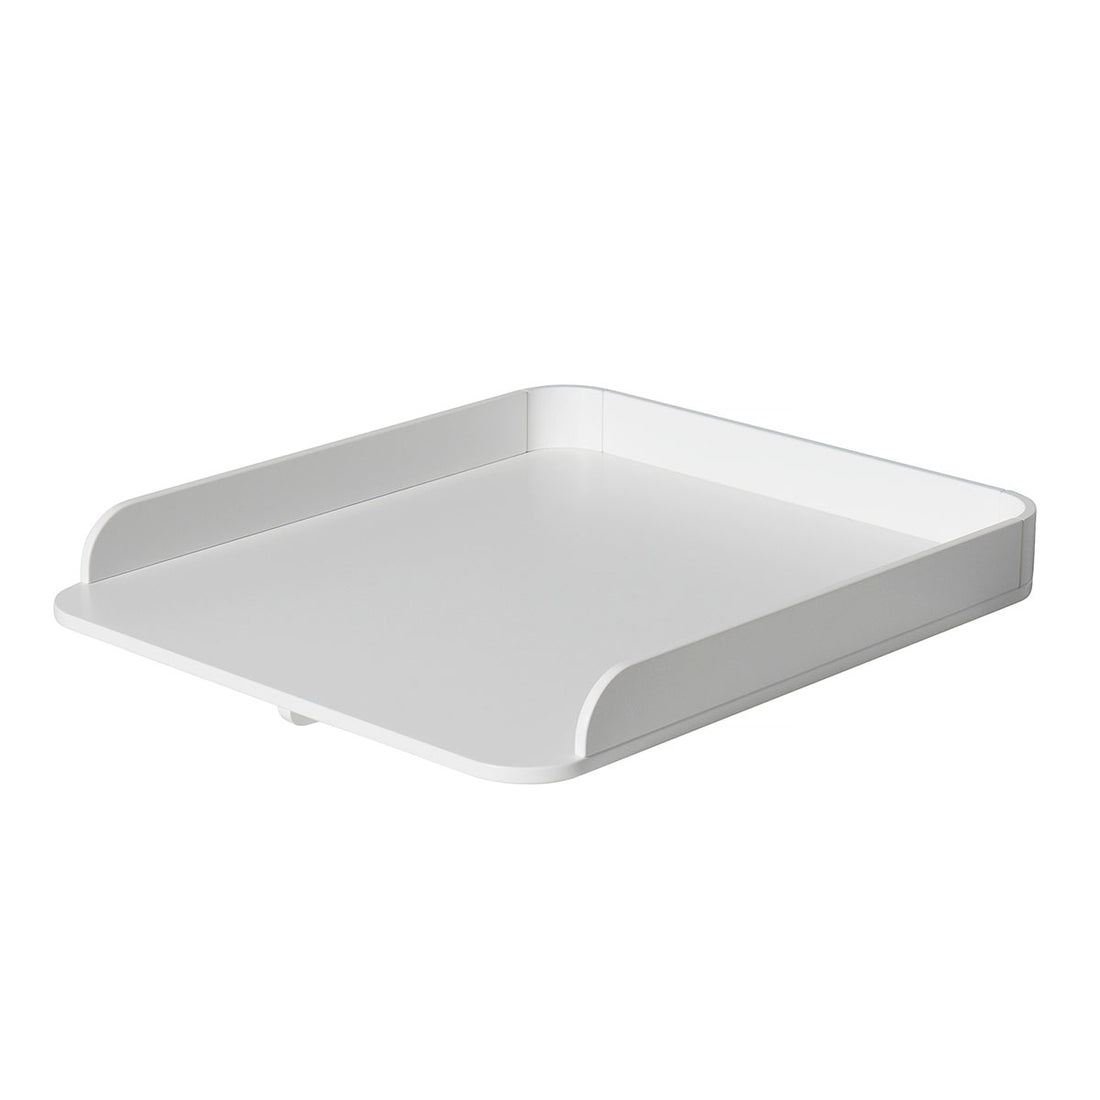 oliver-furniture-wood-nursery-plate-small-white-for-dresser-6-drawers- (1)